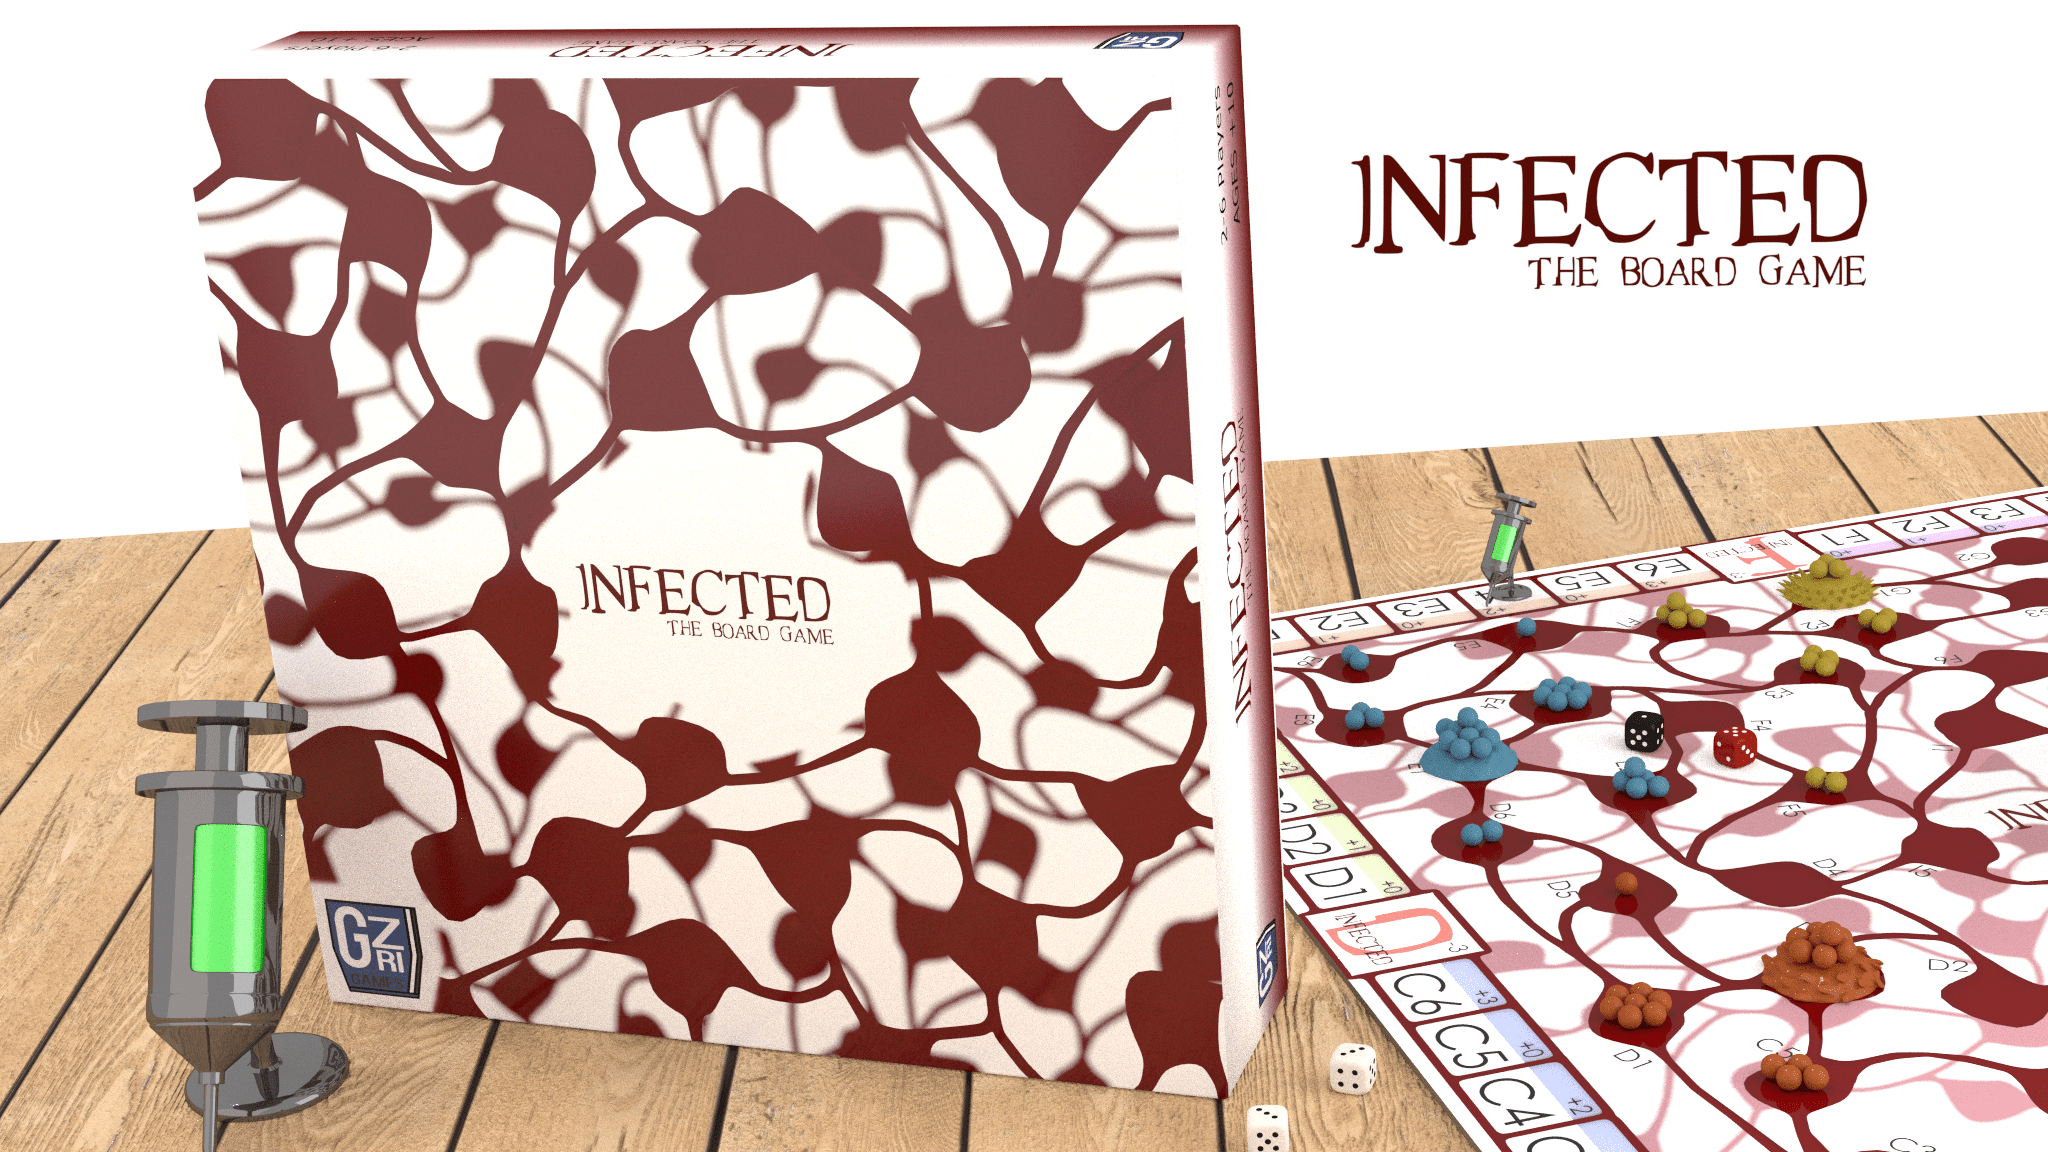 Infected: The board game